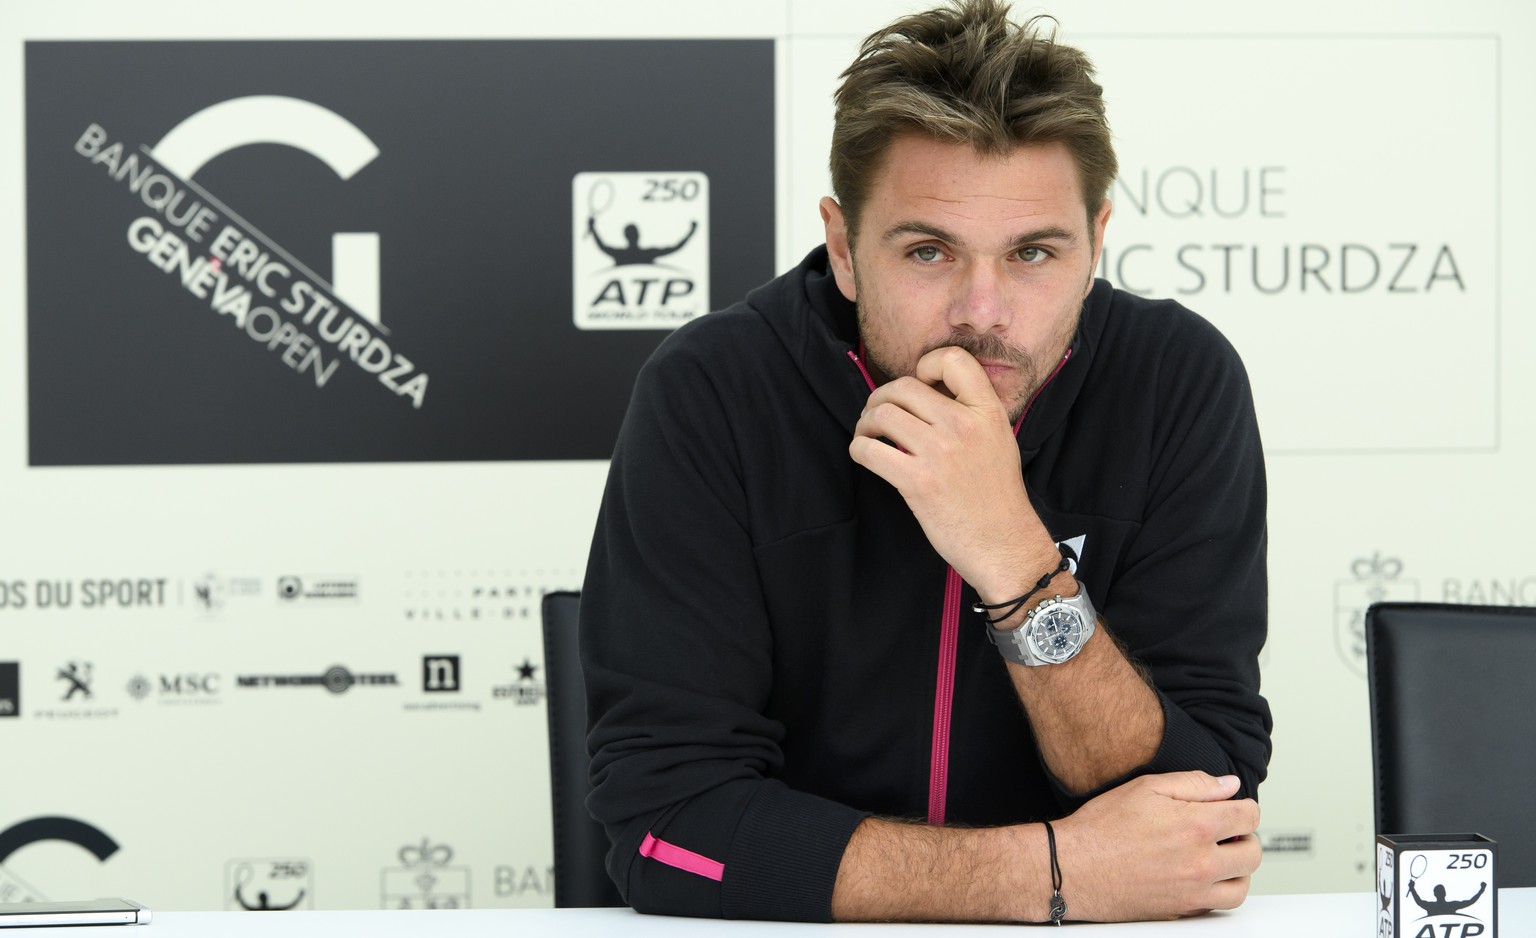 Switzerland&#039;s tennis player Stanislas &quot;Stan&quot; Wawrinka speaks during a press conference prior to the Geneva Open ATP 250 Tennis tournament, in Geneva, Monday, May 21, 2018. (KEYSTONE/Lau ...